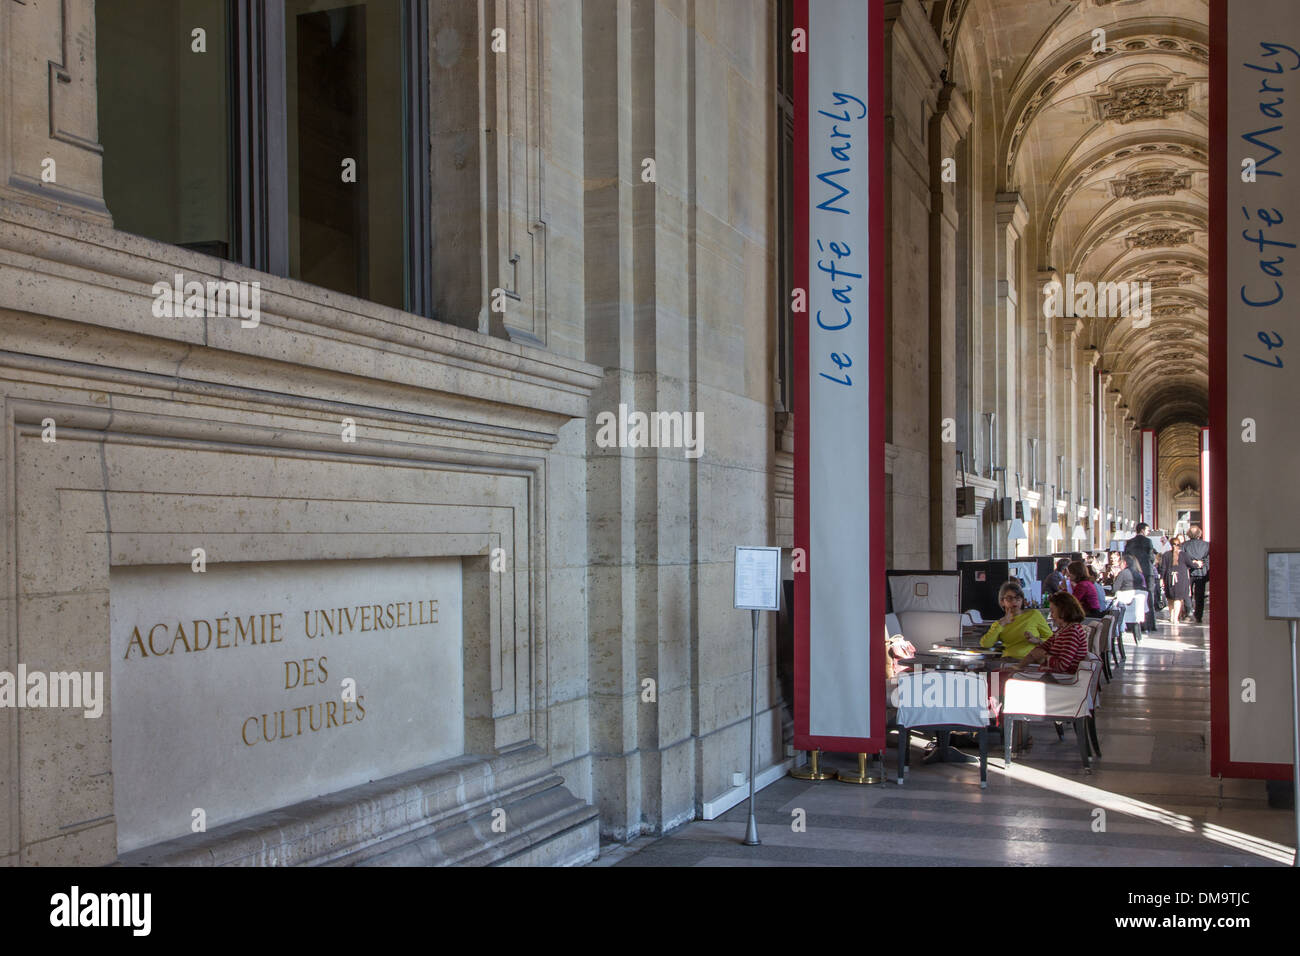 THE CAFE MARLY IN FRONT OF THE UNIVERSAL ACADEMY OF CULTURES AT THE LOUVRE, 1ST ARRONDISSEMENT, PARIS, FRANCE Stock Photo